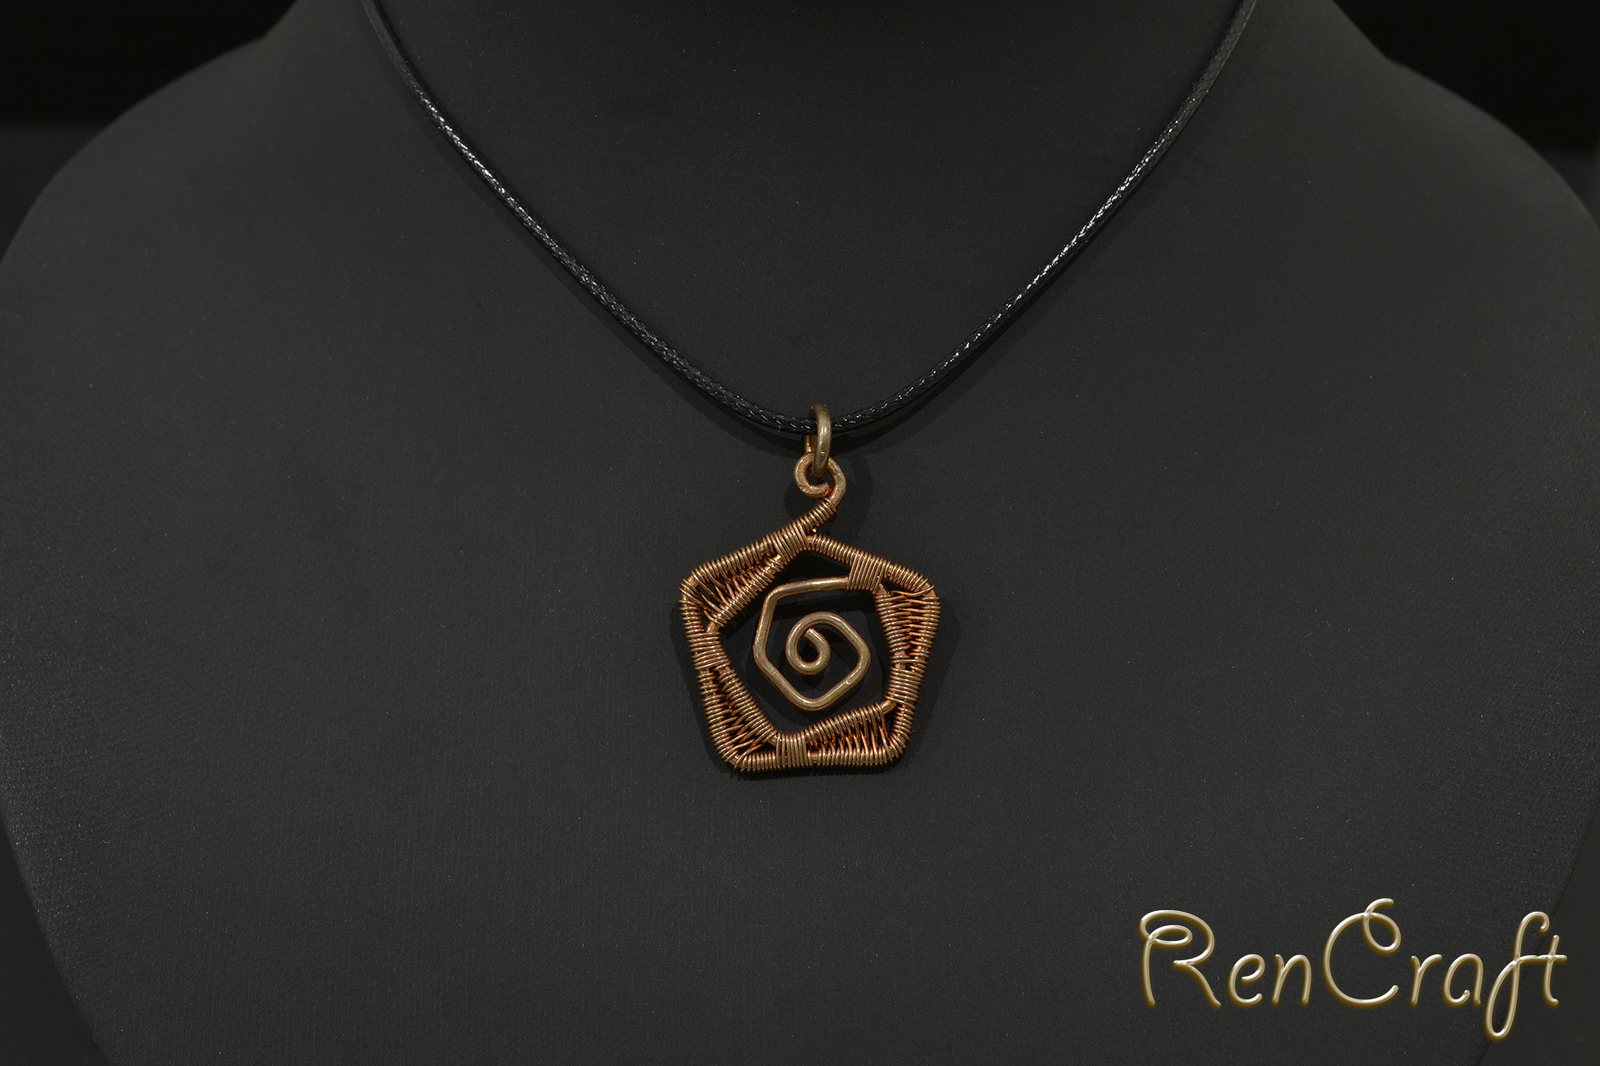 Copper pendants - My, Needlework without process, Chain mail jewelry, Handmade, Chainmaille, Copper jewelry, Wire wrap